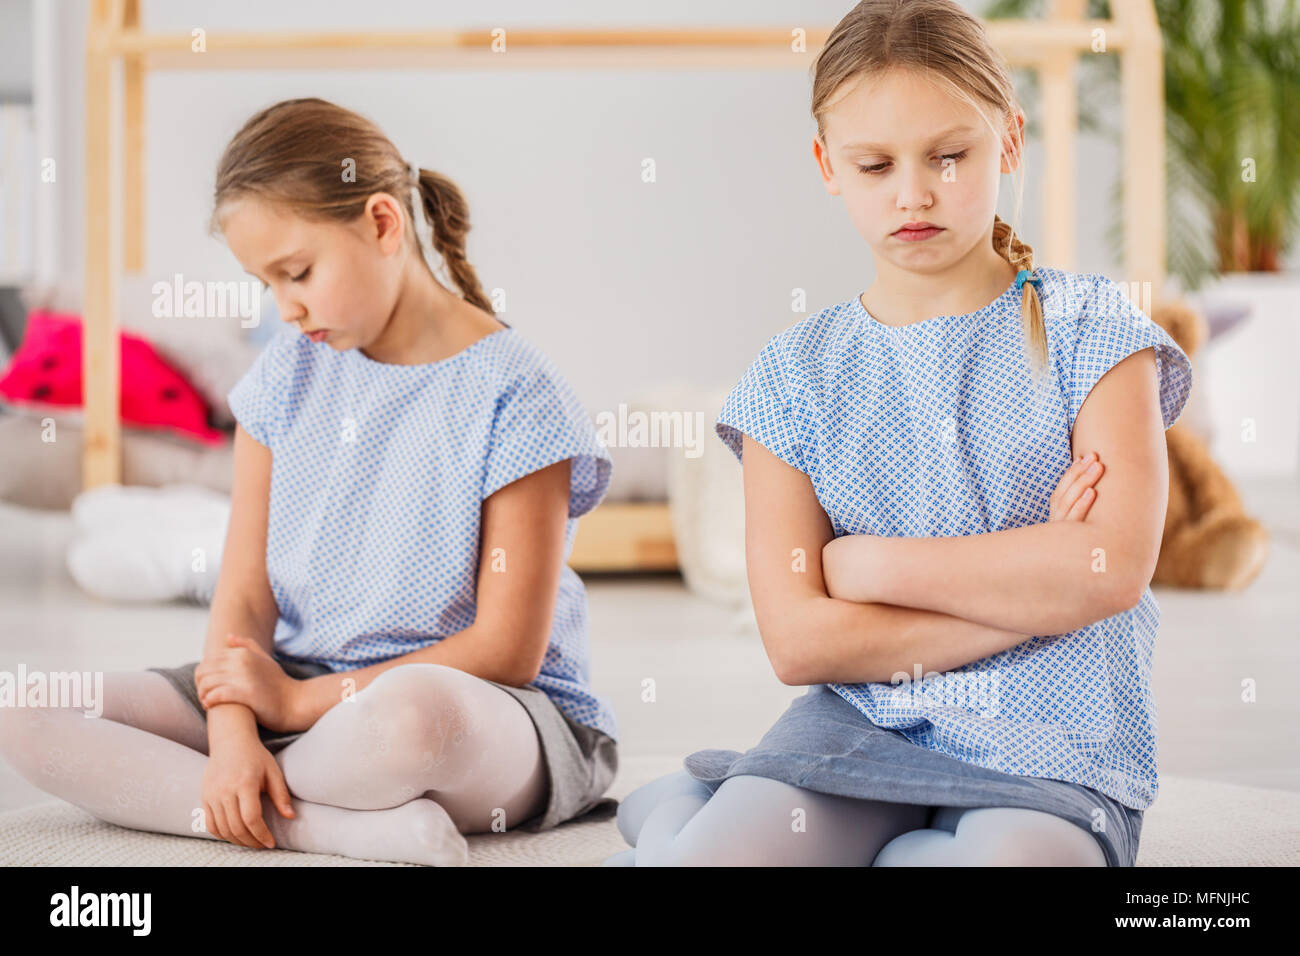 Twin sisters sad after a fight, looking down, sitting with her arms crossed in a bright kid's bedroom Stock Photo